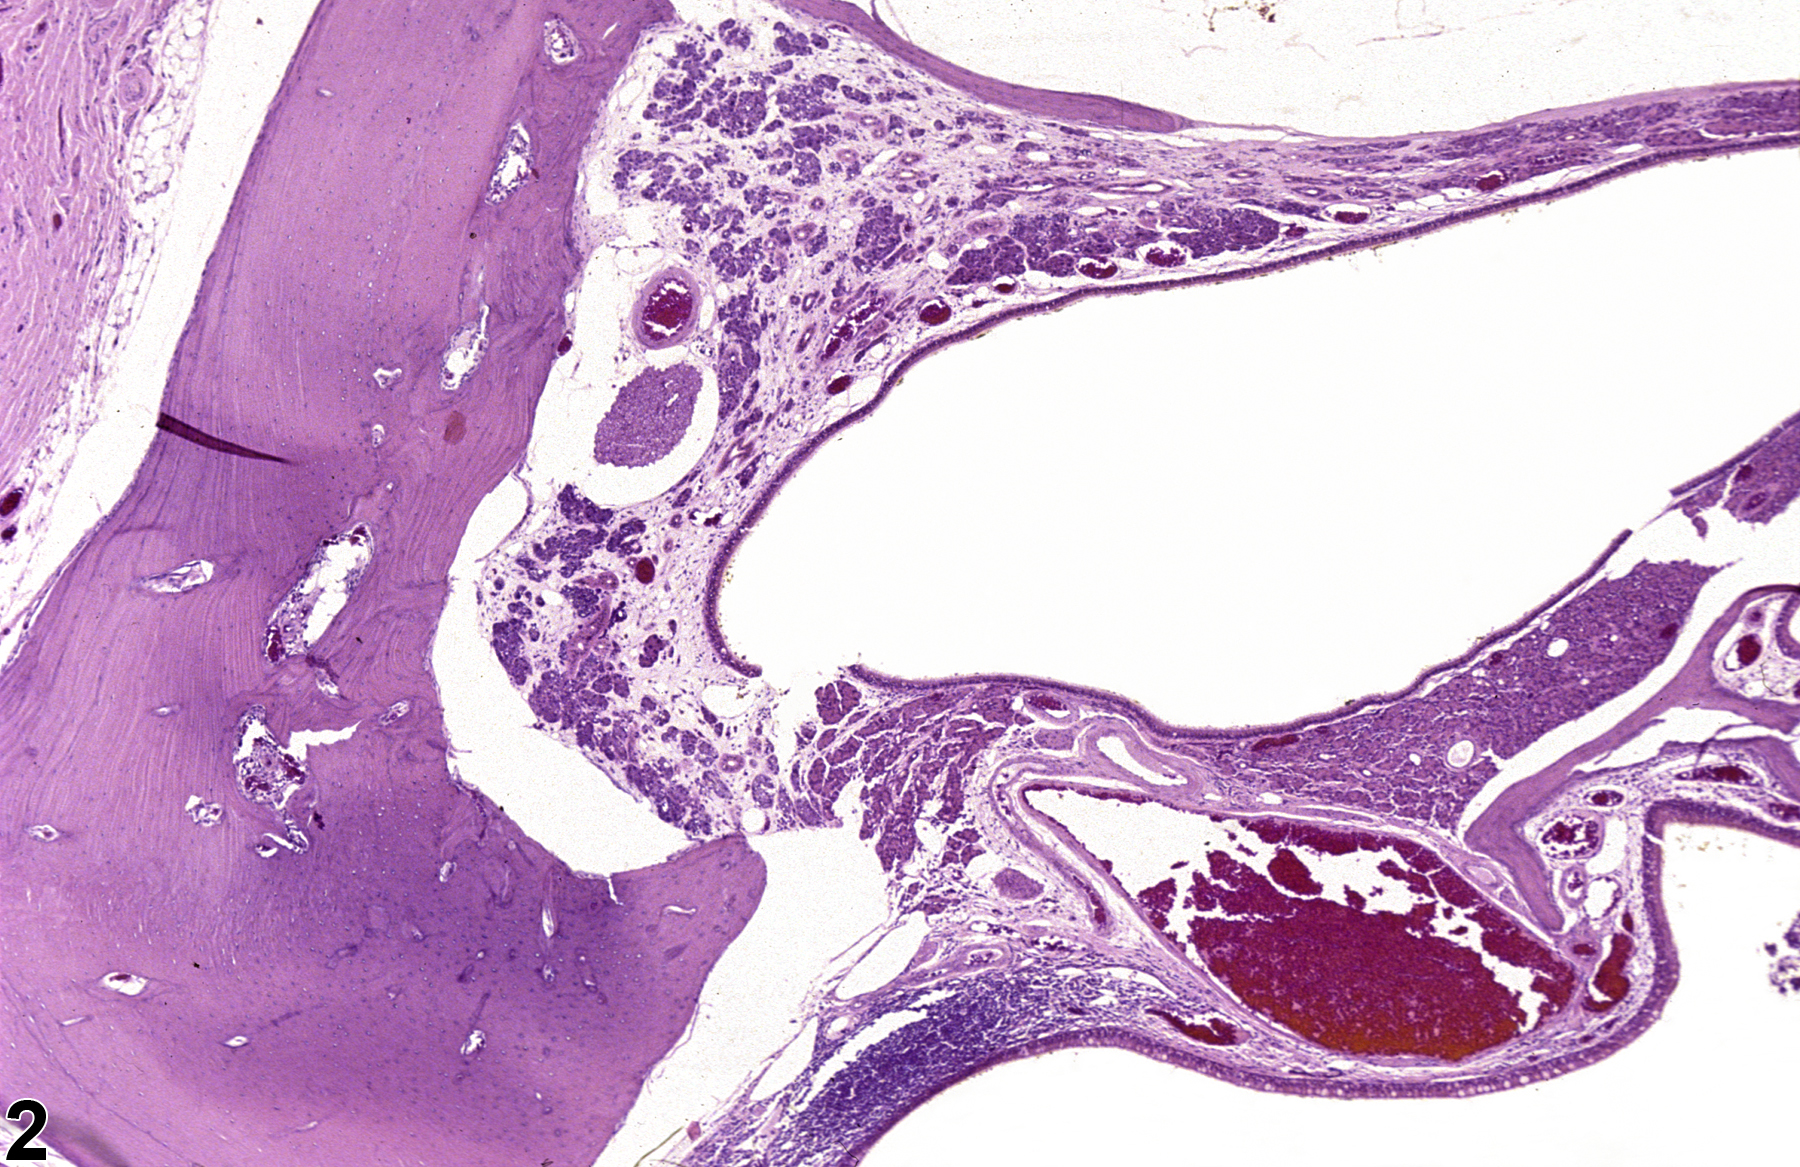 Image of degeneration in the nose, Steno's glands from a male F344/N rat in a chronic study